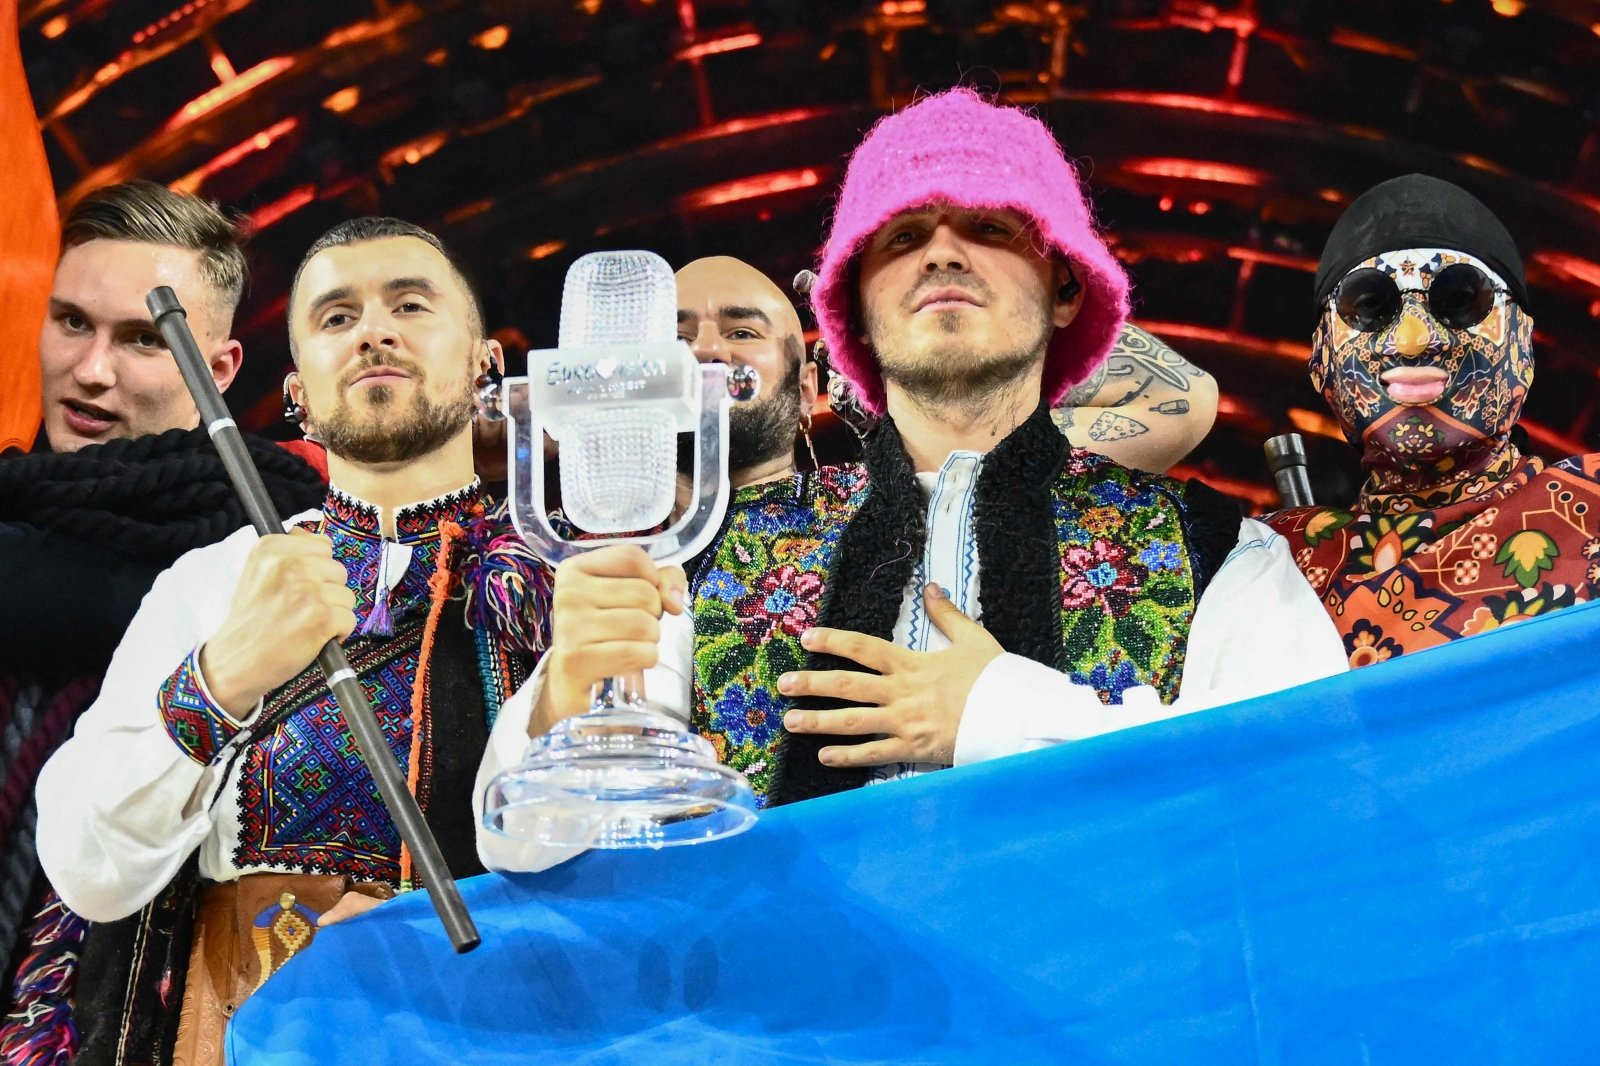 The Kalush Orchestra group sold the Eurovision winners' cup for $900 thousand: this money will be used to buy a PD-2 UAV complex for the Ukrainian army